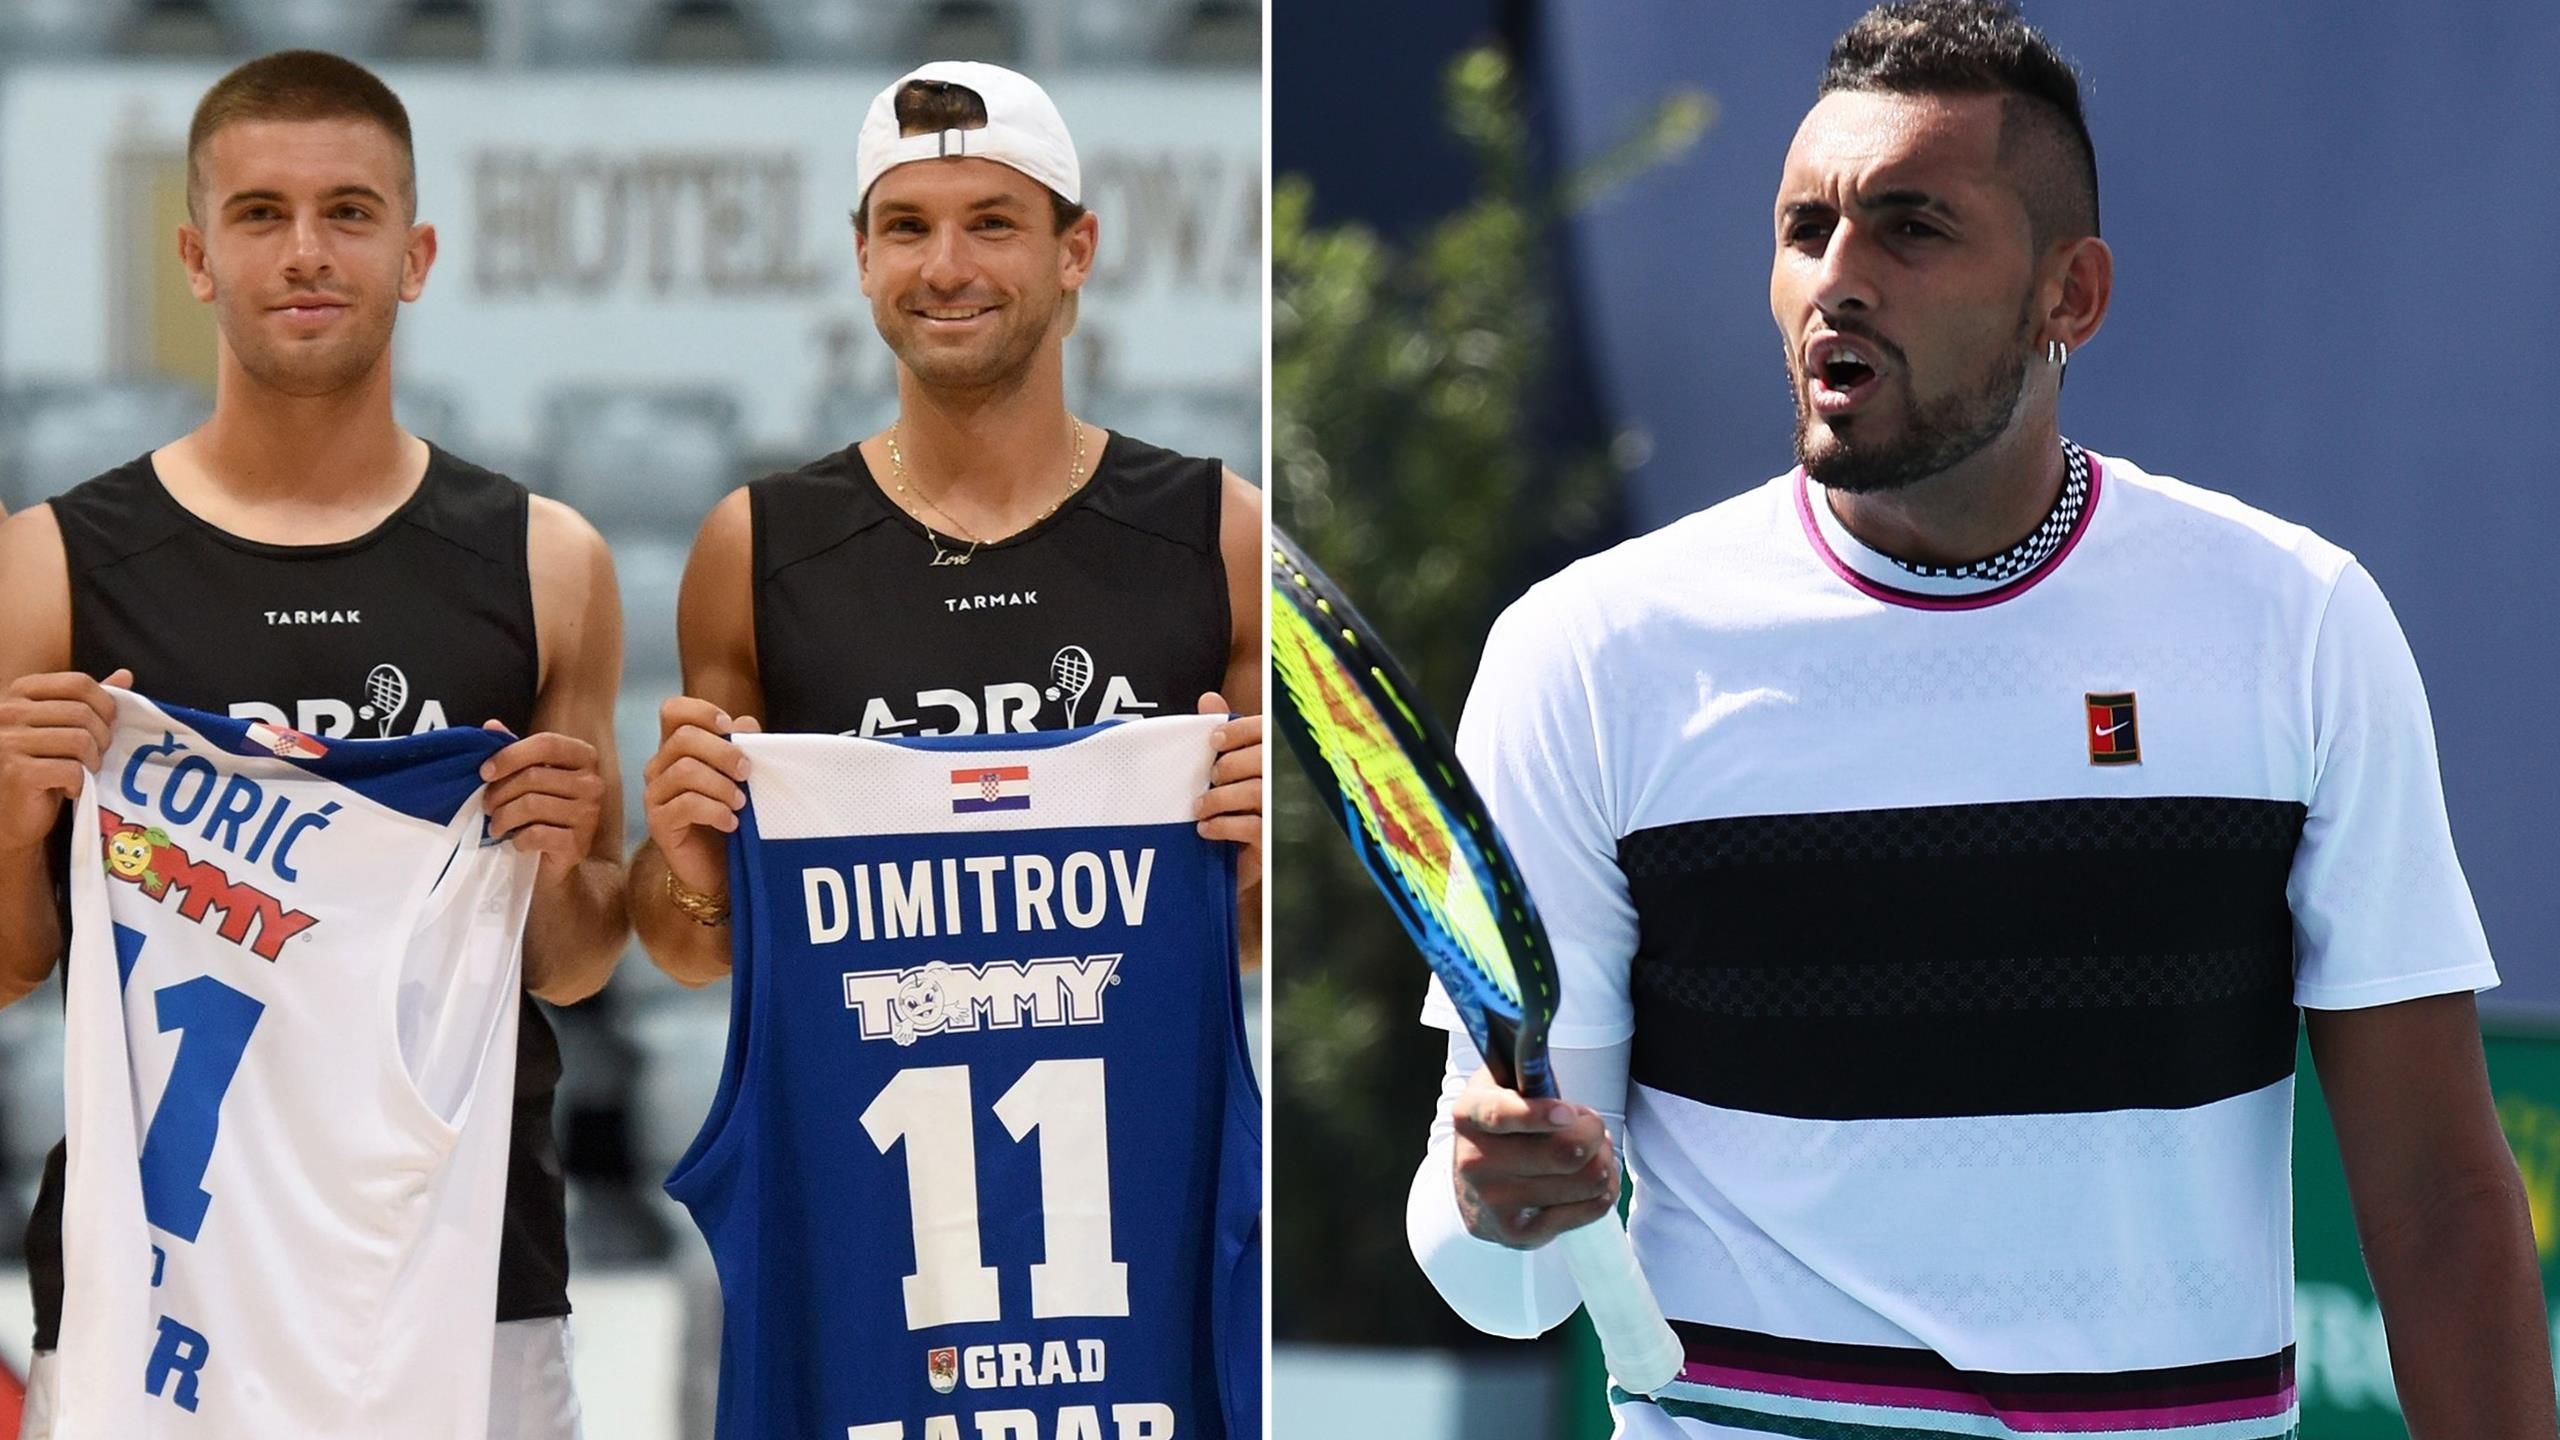 Nick Kyrgios hits back at Borna Coric on Adria Tour - Do you have rocks in your head?